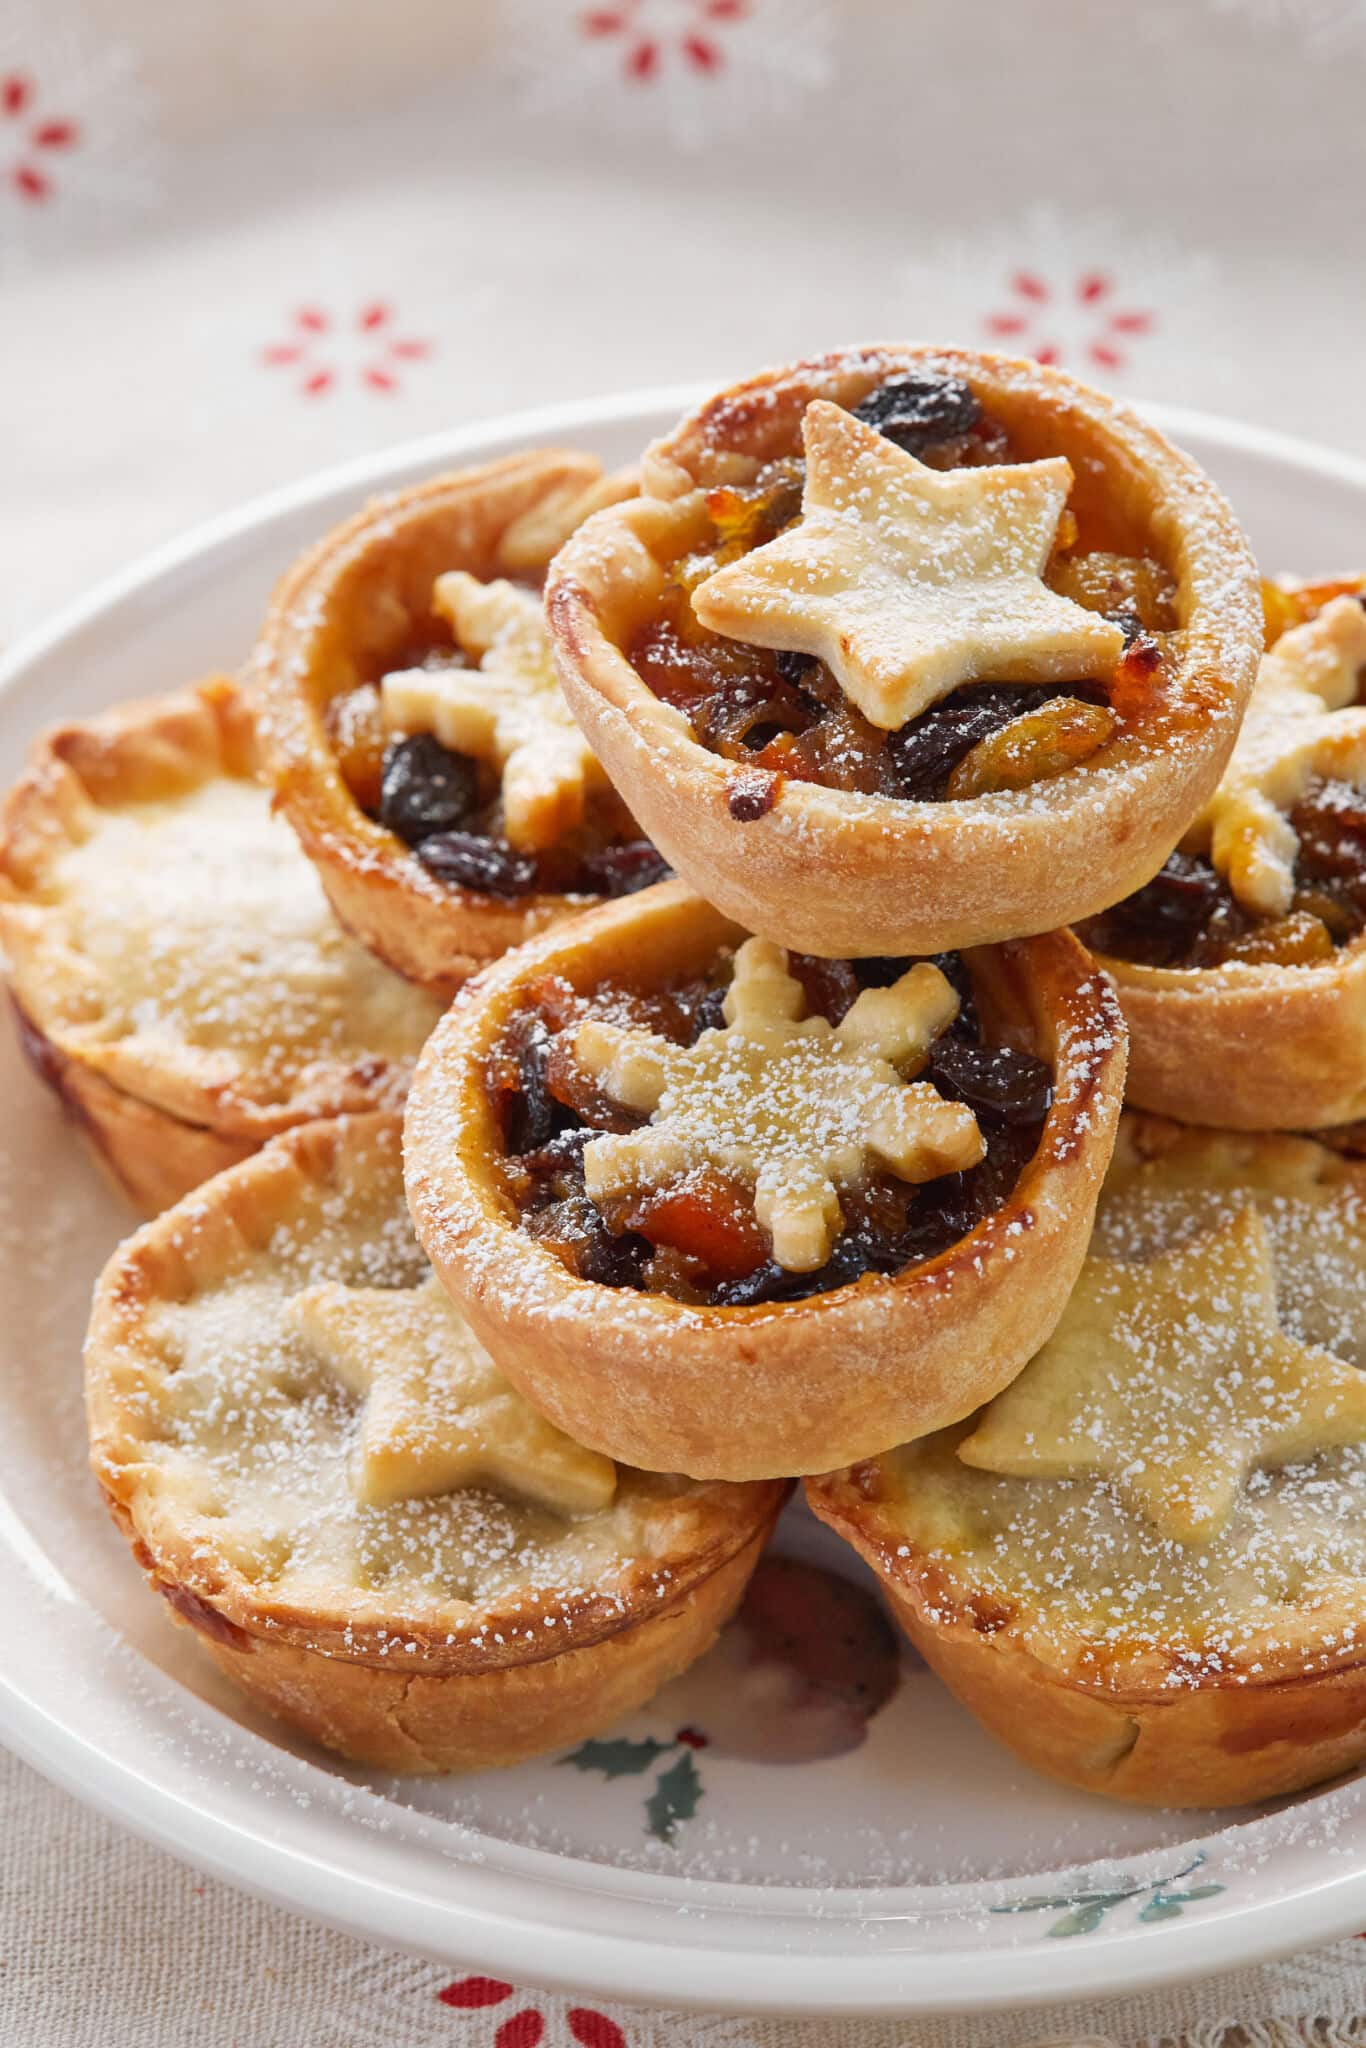 Traditional Irish Mince Pies have golden flaky pastry and slightly moist, chewy, and perfectly sticky mincemeat, dusted with powdered sugar. The top crust are shaped into snow flakes or stars. They're served on a big white platter.